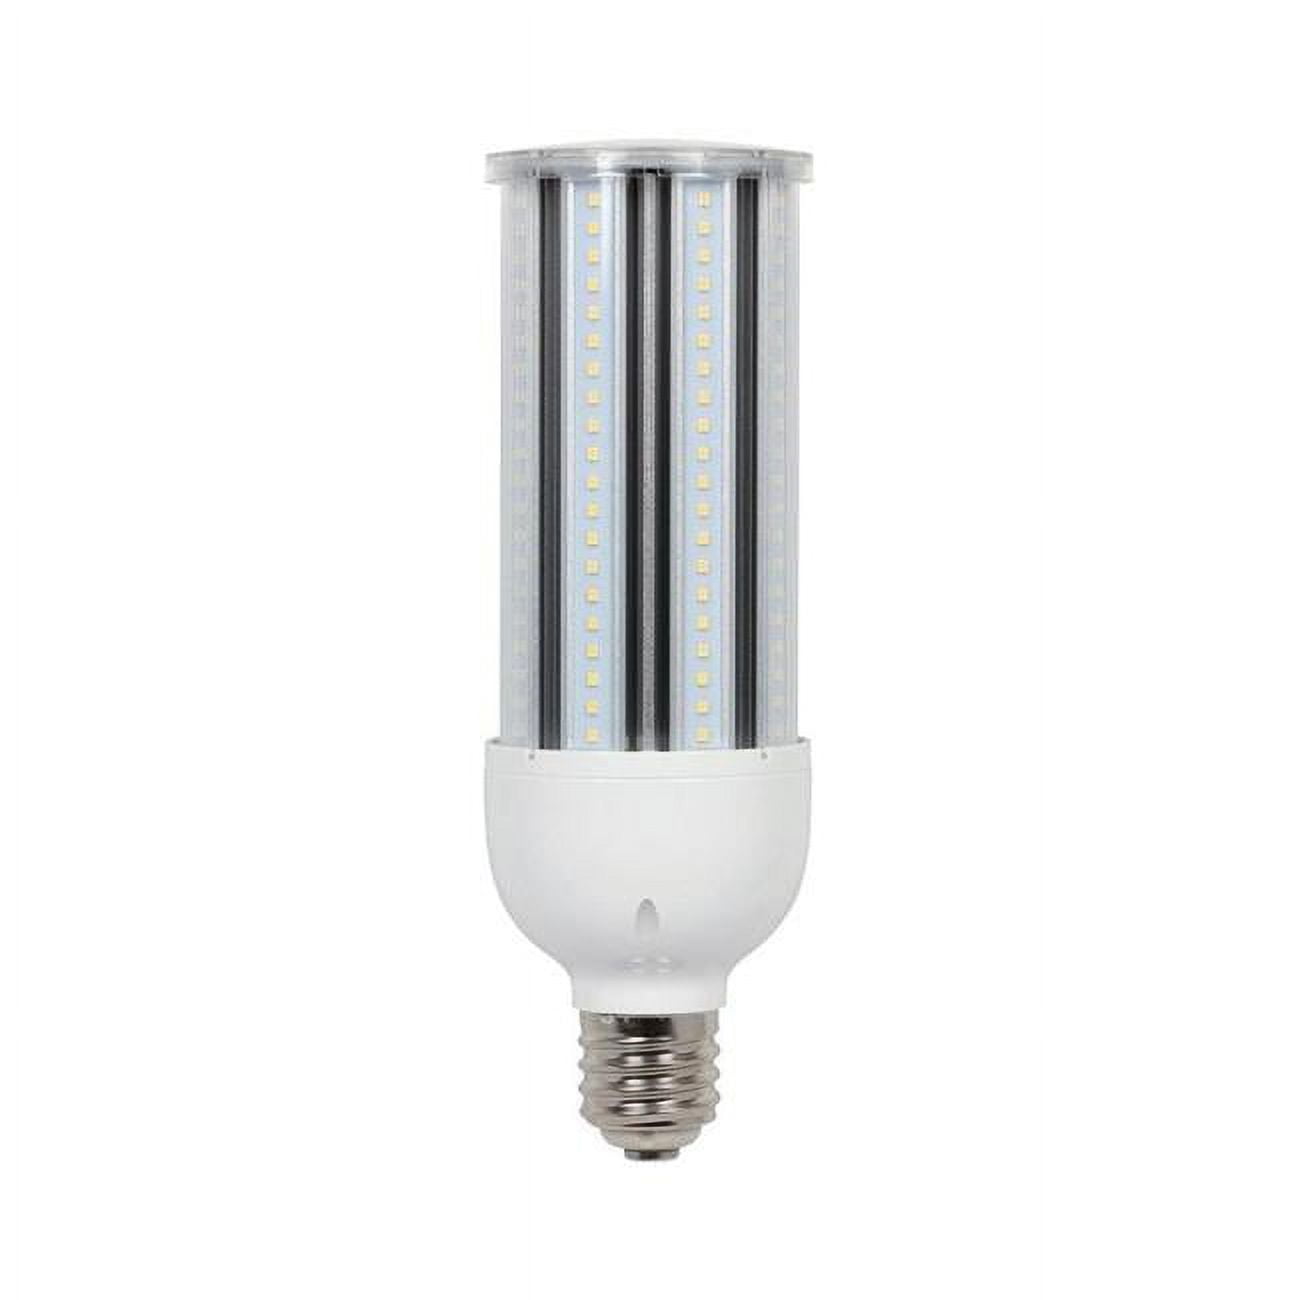 Picture of Westinghouse 3713807 54W T28 LED Bulb, 6480 Lumens - Daylight